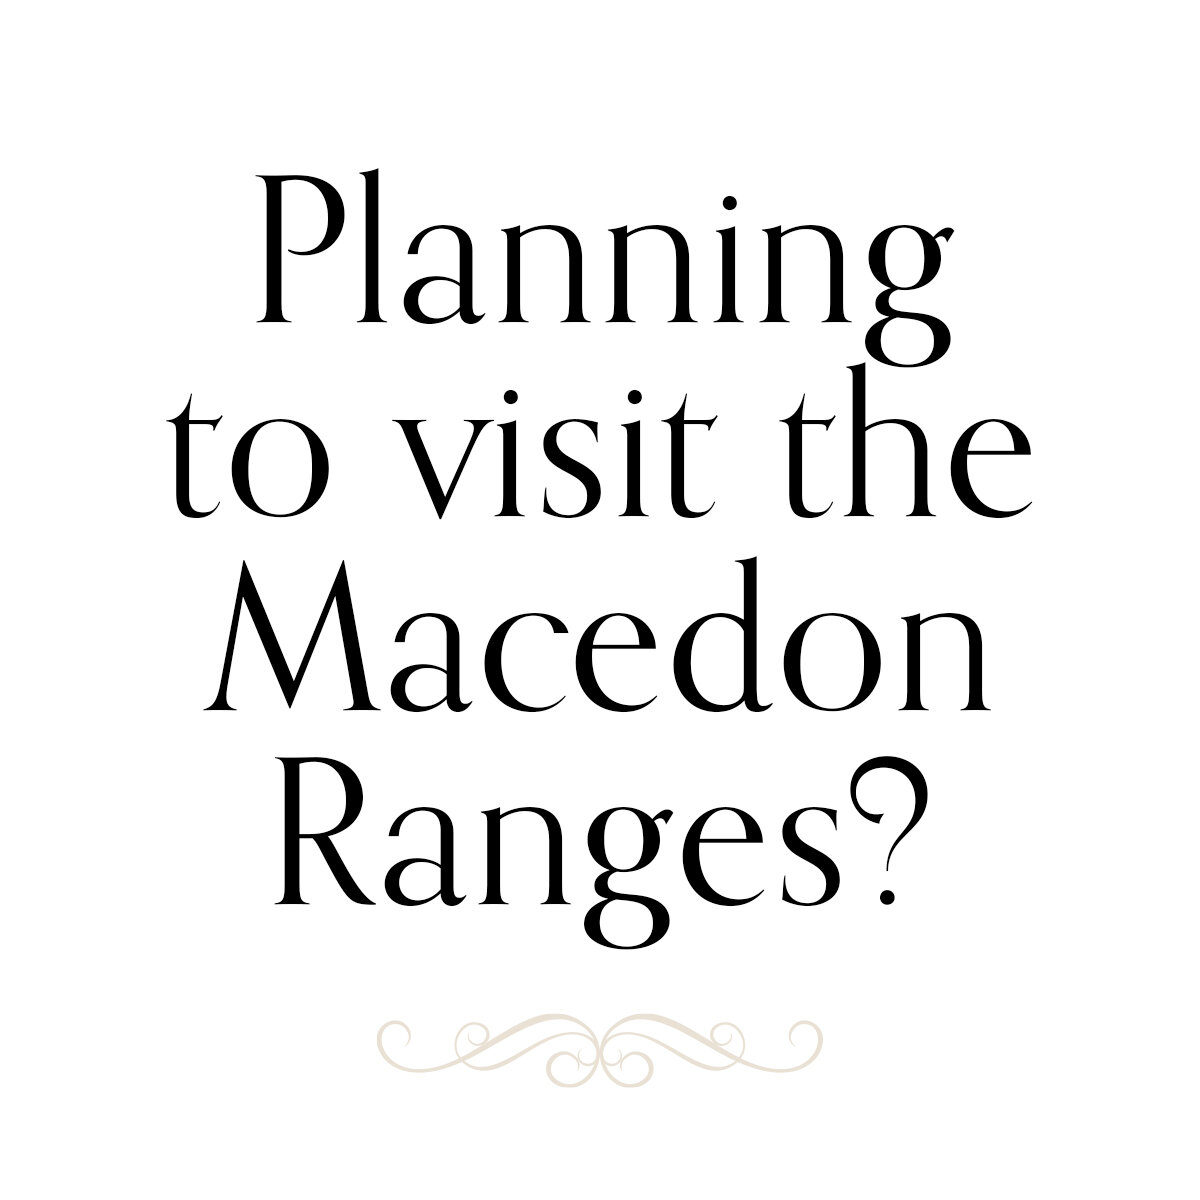 There's always plenty to see and do in the Macedon Ranges and the picturesque town of Lancefield is the perfect place to base yourself. 

Join us for the Autumn Festival 
https://www.visitmacedonranges.com/autumn-festival/

And if Lancefield's the pe